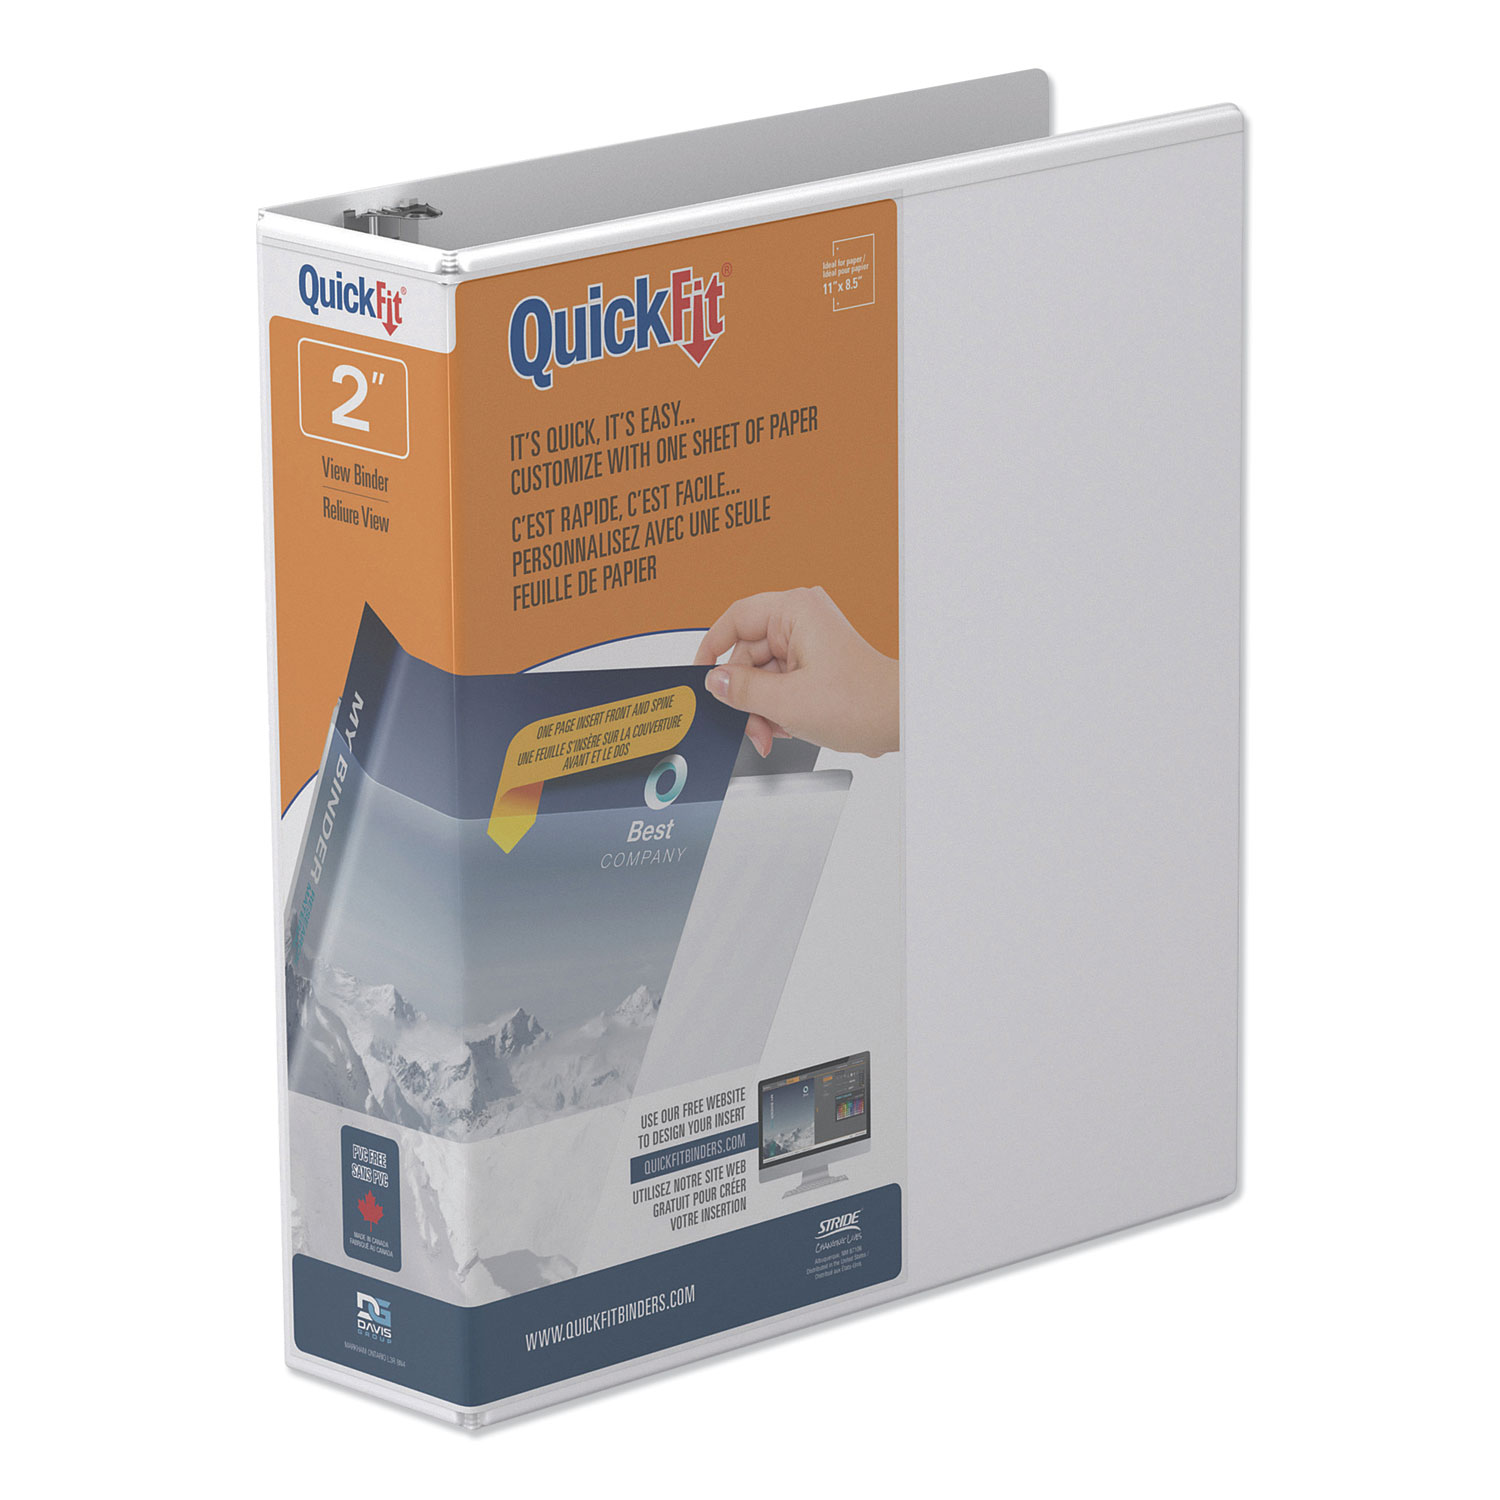  Stride STW88030 QuickFit Round-Ring View Binder, 3 Rings, 2 Capacity, 11 x 8.5, White (STW88030) 